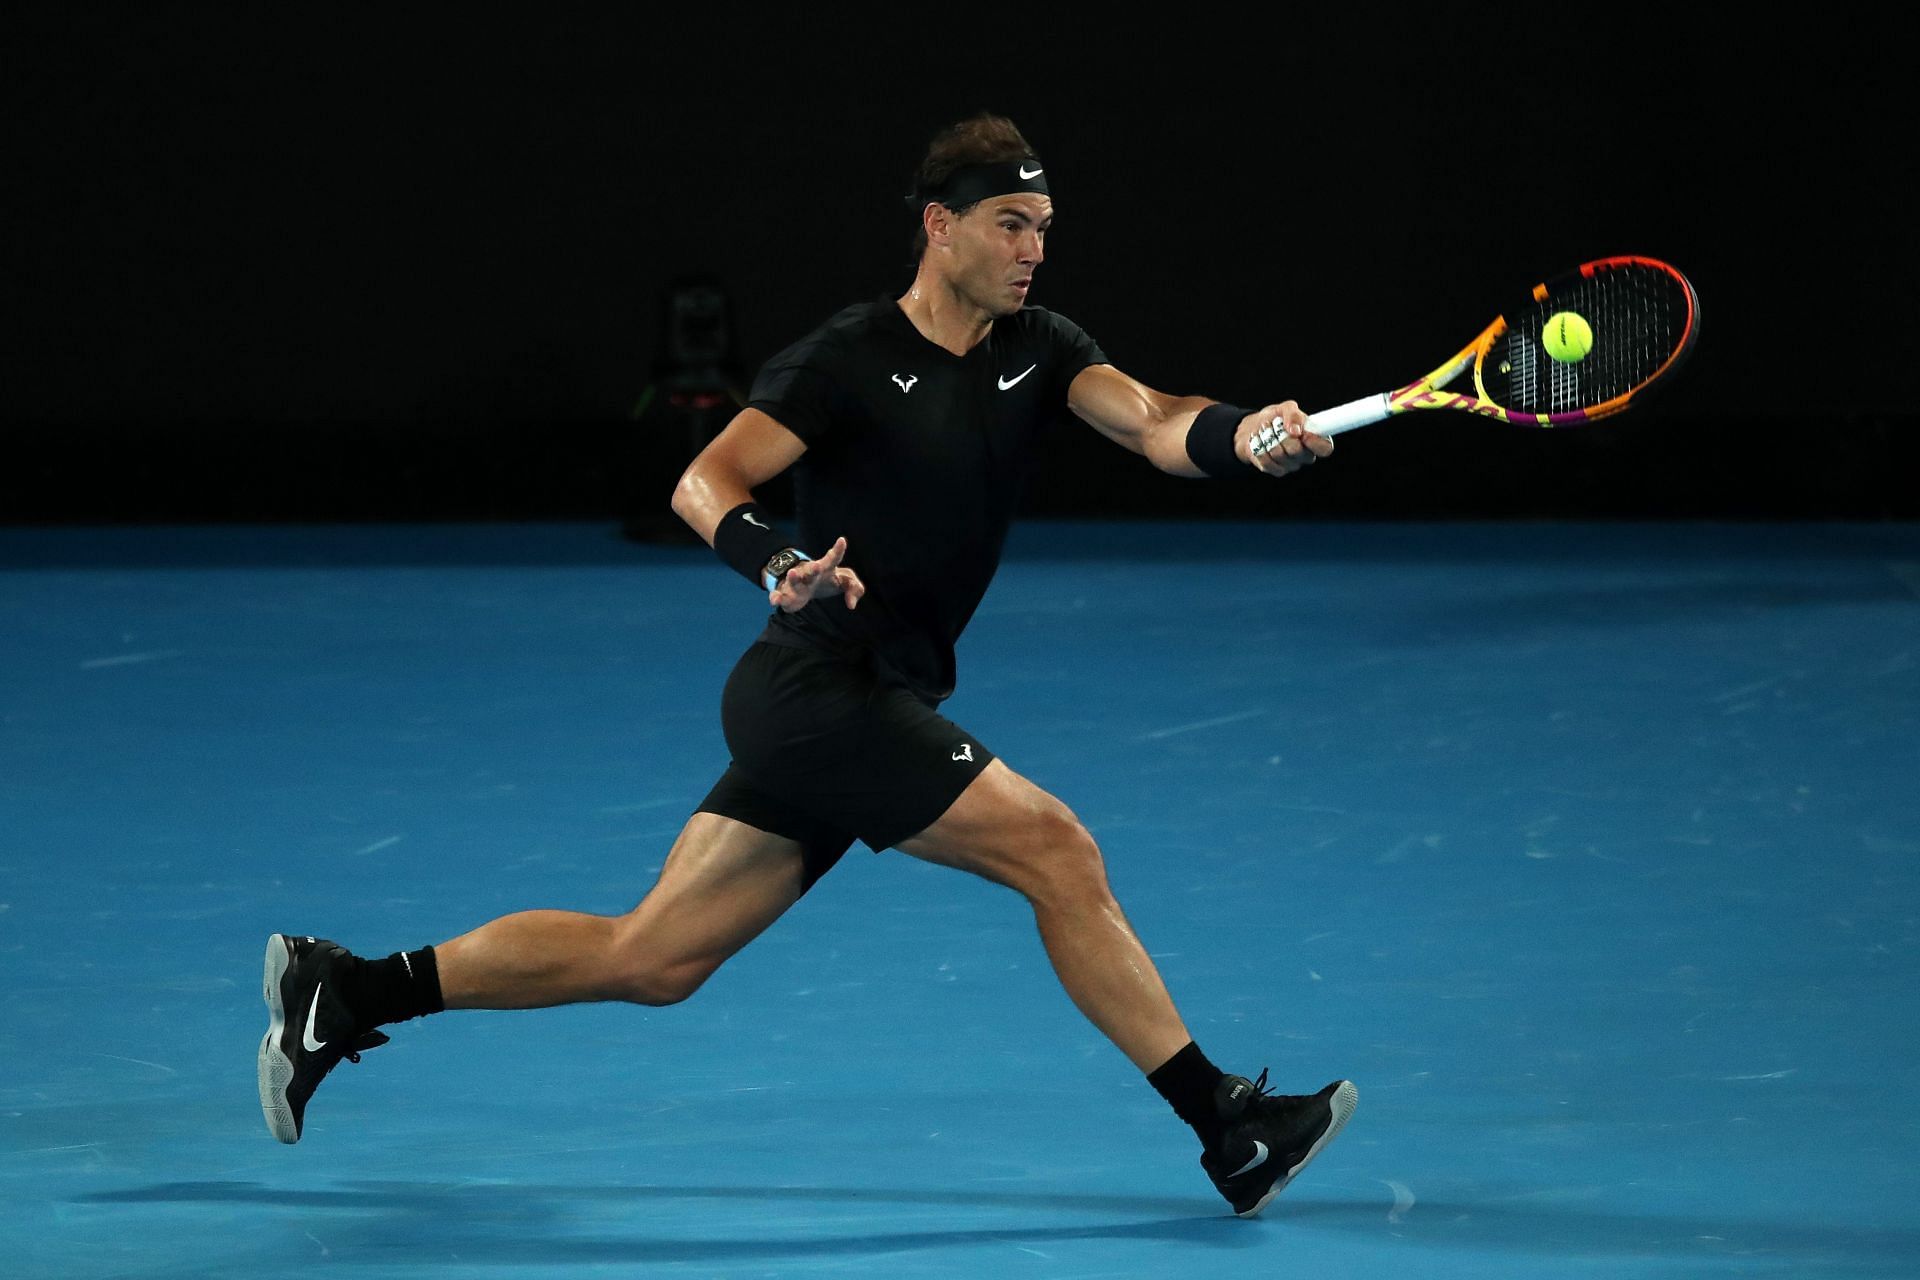 Rafael Nadal raced into the quarterfinals of his first tournament since returning from injury